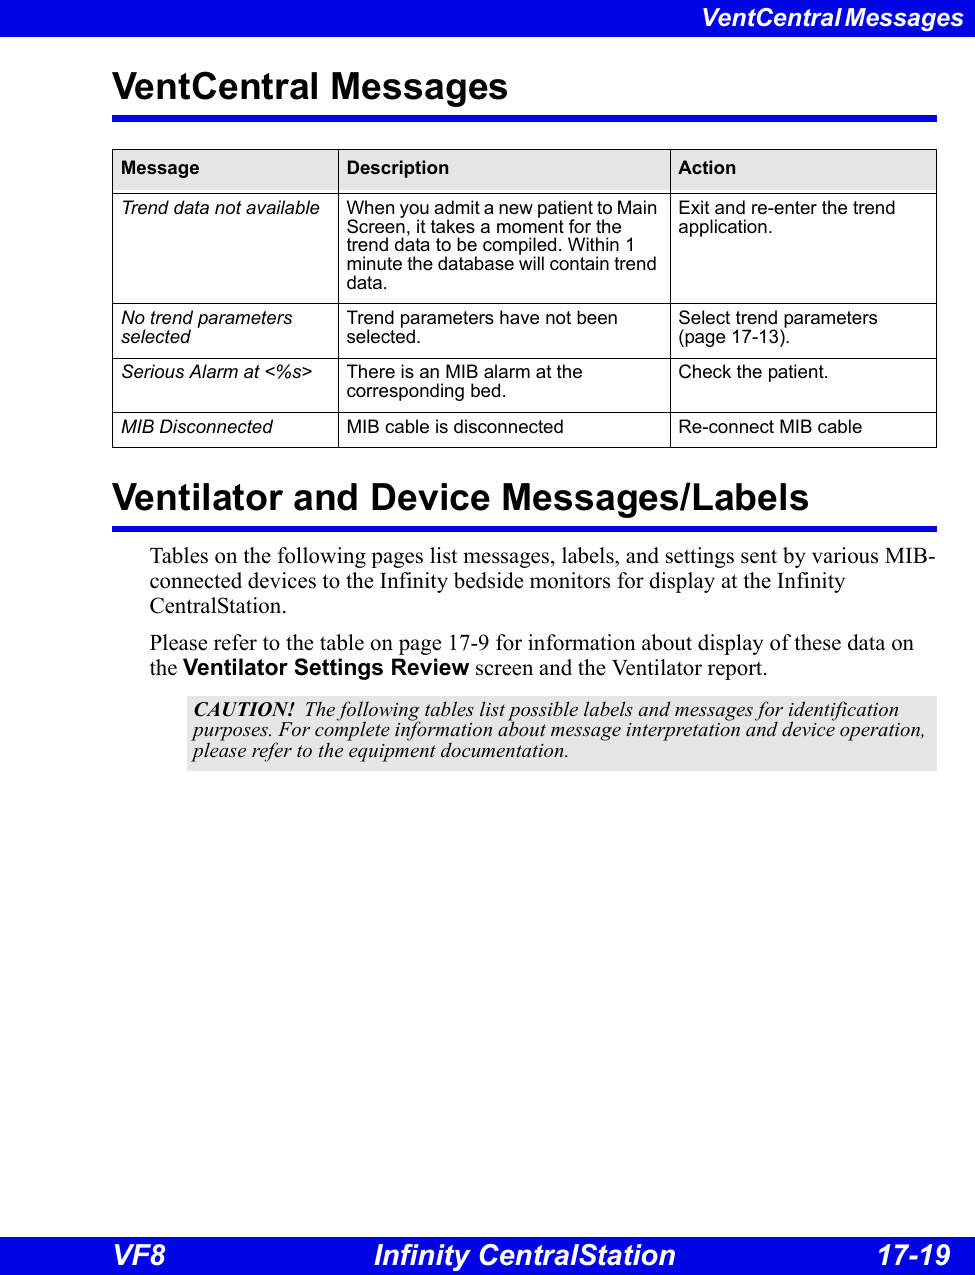 VentCentral Messages Infinity CentralStation 17-19 VF8VentCentral Messages Ventilator and Device Messages/LabelsTables on the following pages list messages, labels, and settings sent by various MIB-connected devices to the Infinity bedside monitors for display at the Infinity CentralStation. Please refer to the table on page 17-9 for information about display of these data on the Ventilator Settings Review screen and the Ventilator report.   Message Description ActionTrend data not available When you admit a new patient to Main Screen, it takes a moment for the trend data to be compiled. Within 1 minute the database will contain trend data.Exit and re-enter the trend application.No trend parameters selectedTrend parameters have not been selected.Select trend parameters (page 17-13).Serious Alarm at &lt;%s&gt; There is an MIB alarm at the corresponding bed.Check the patient.MIB Disconnected MIB cable is disconnected Re-connect MIB cableCAUTION!  The following tables list possible labels and messages for identification purposes. For complete information about message interpretation and device operation, please refer to the equipment documentation.